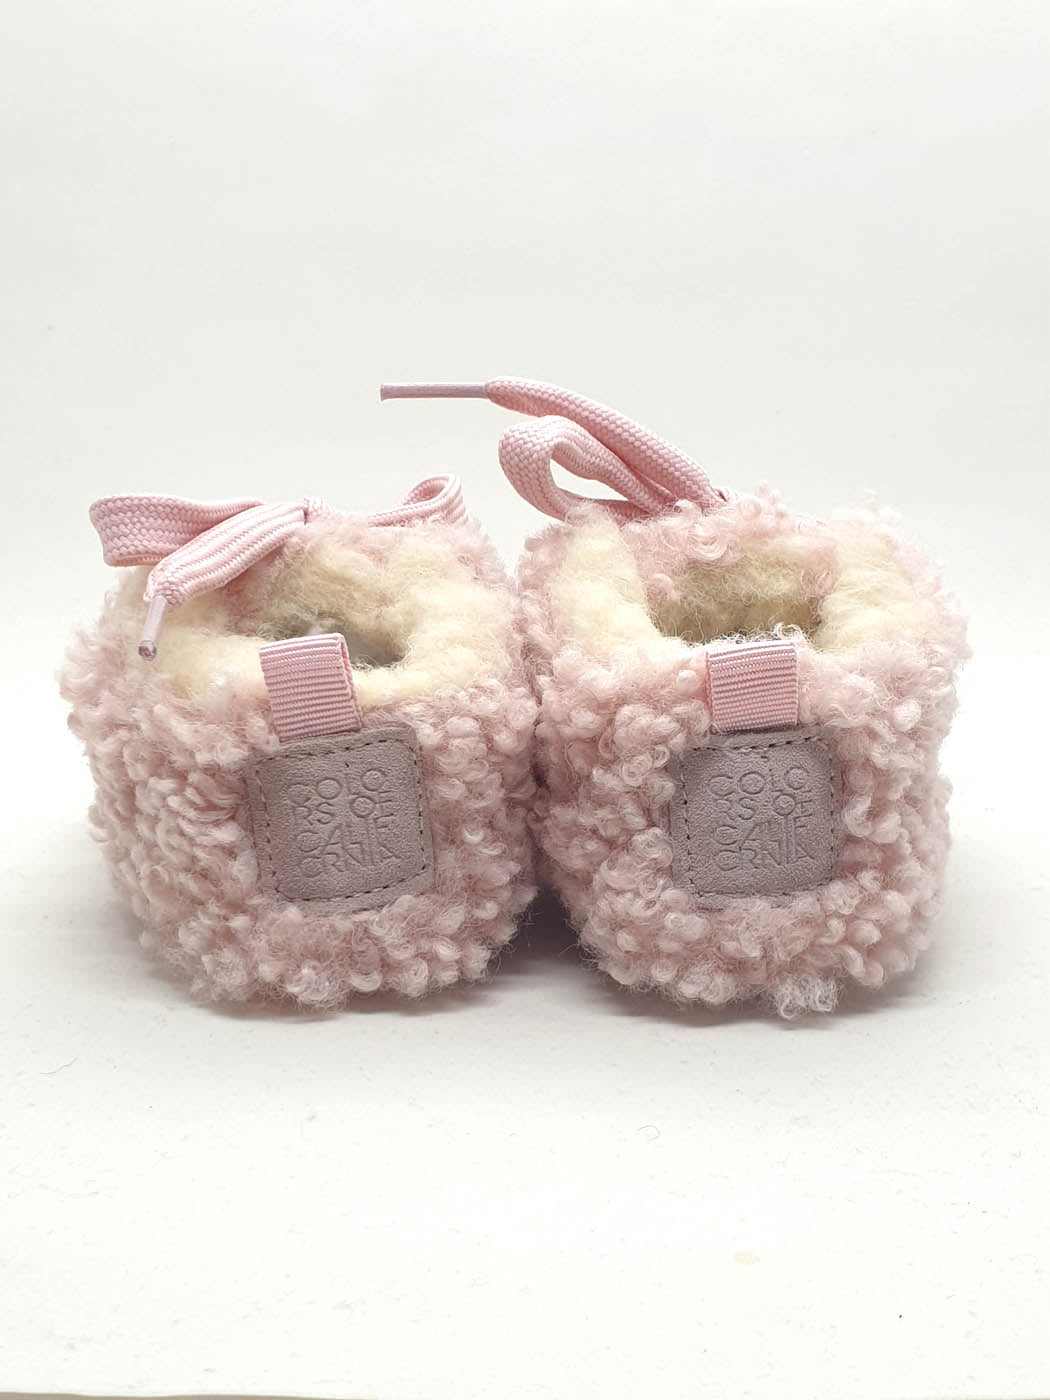 COC-TEDDY NEWBORN shoe with Faux fur-pink